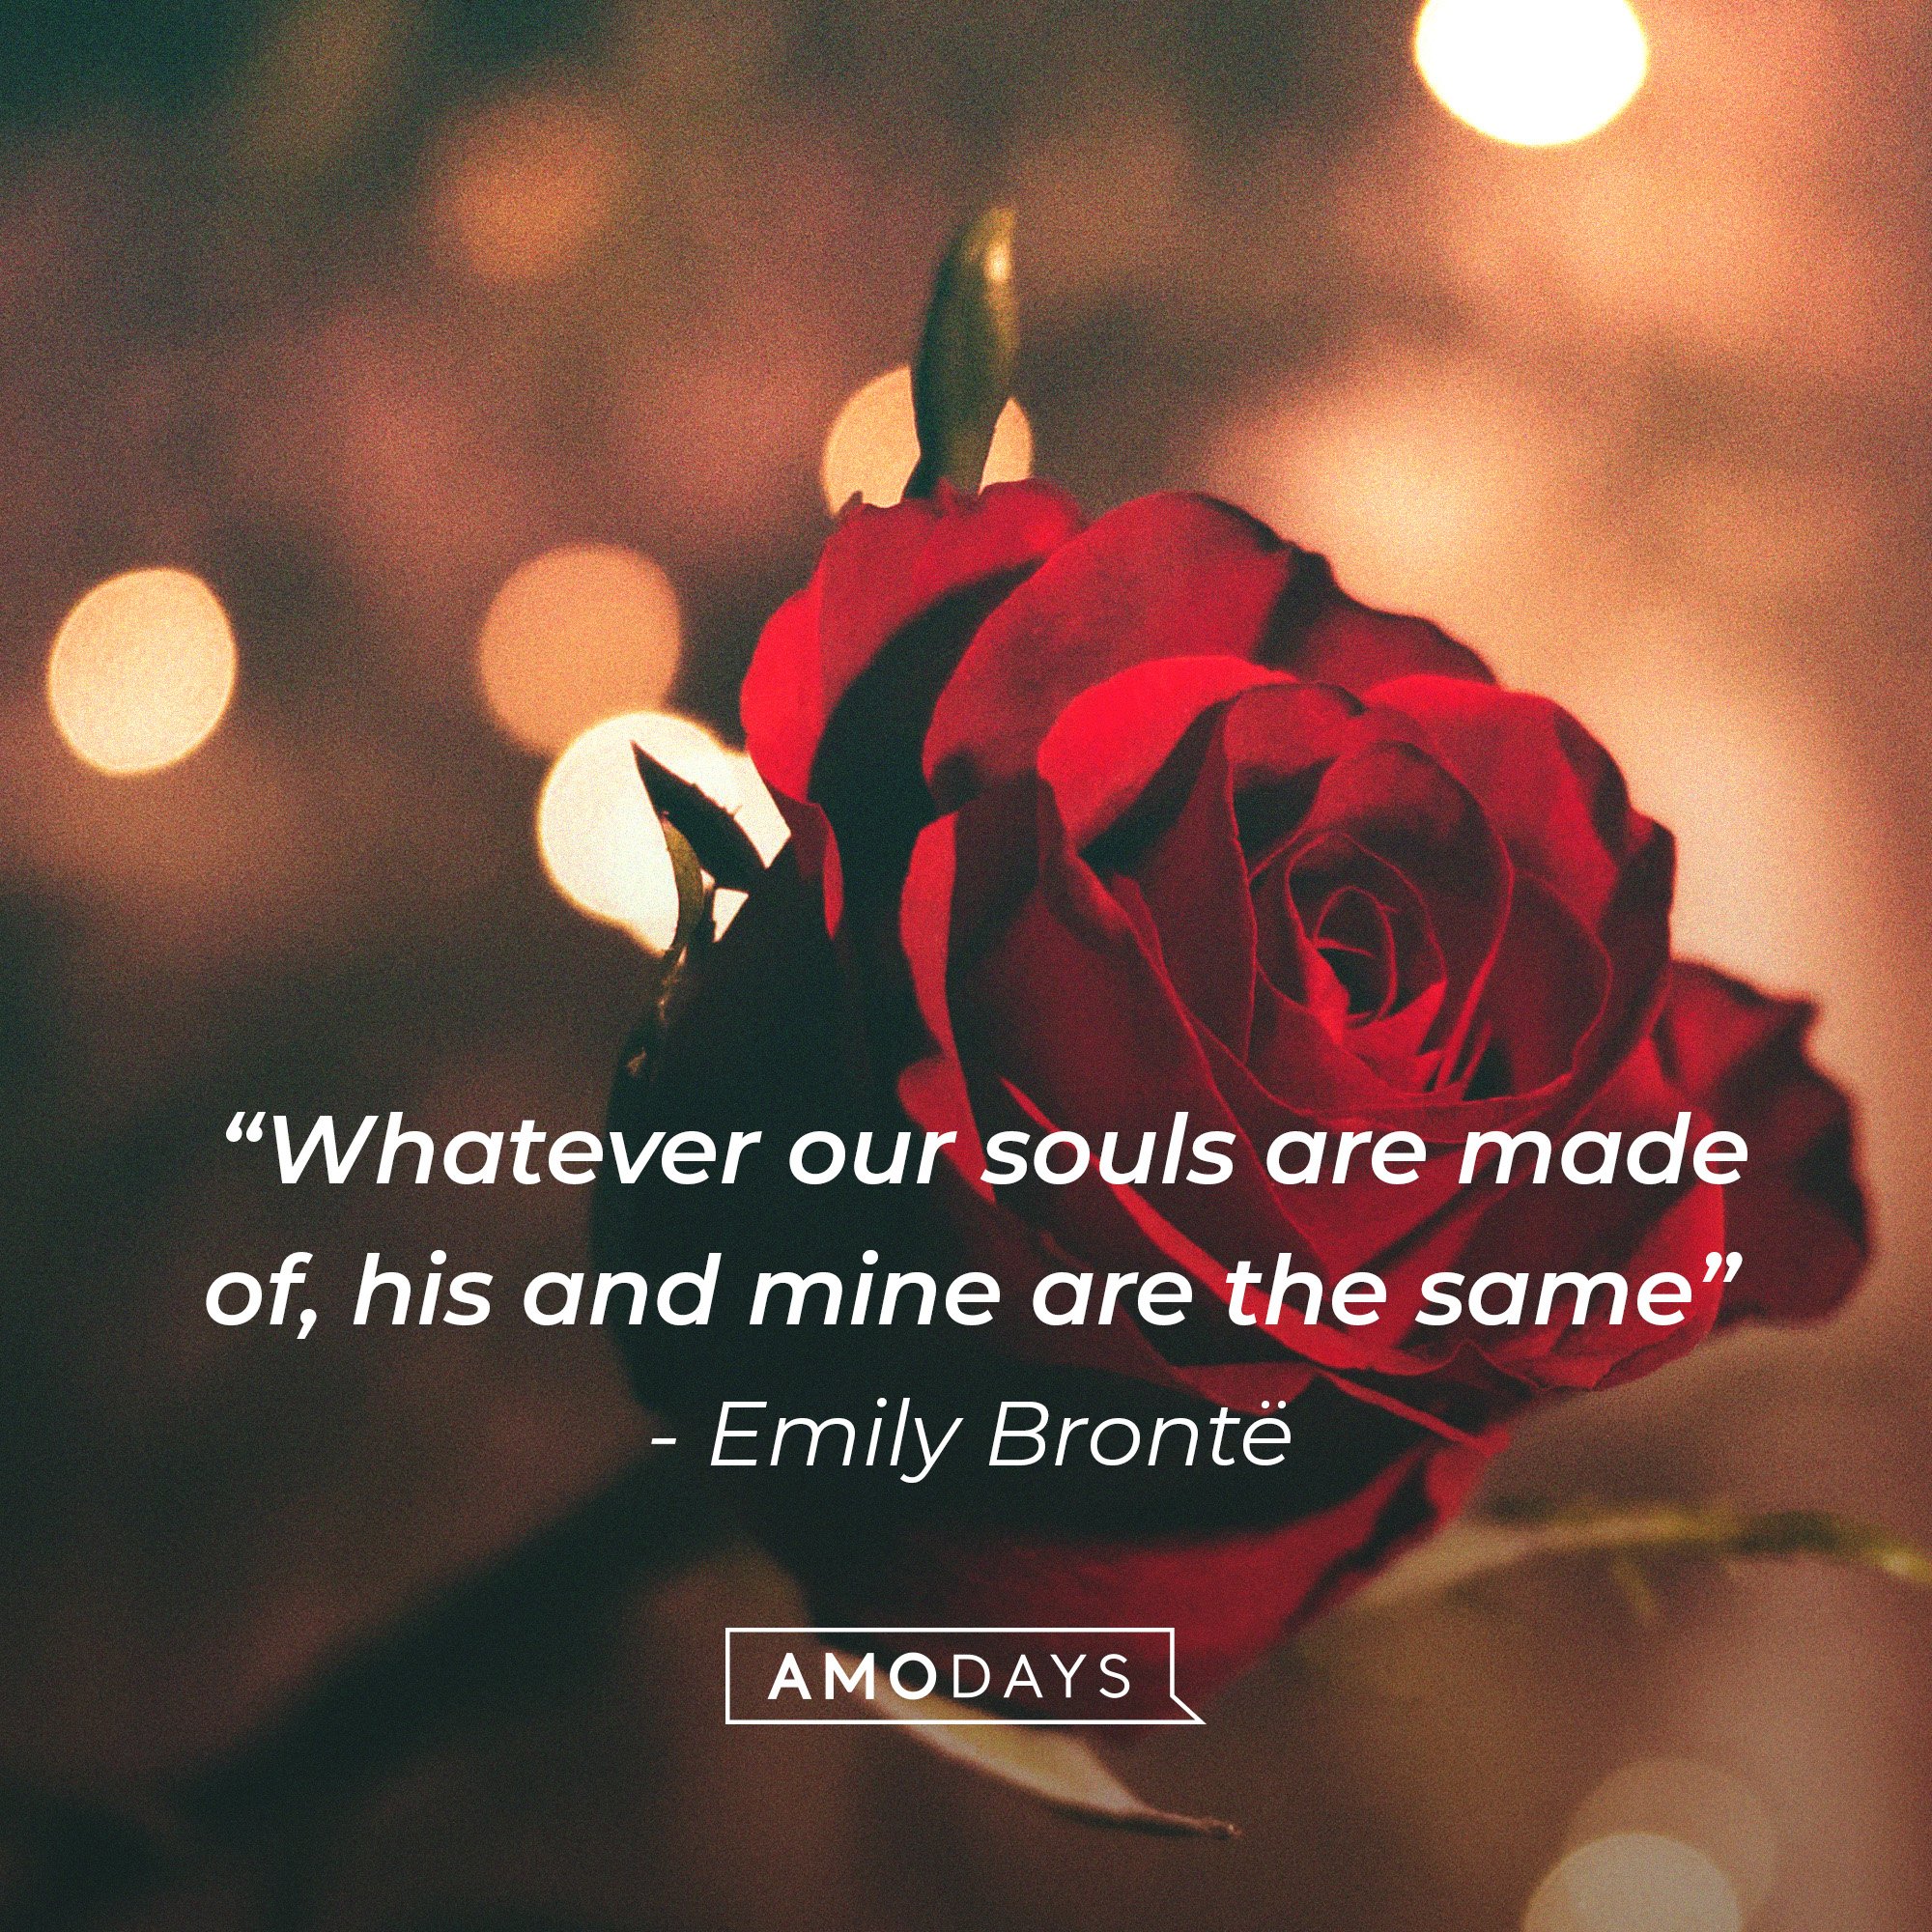  Emily Brontë's: “Whatever our souls are made of, his and mine are the same” — Image: AmoDays